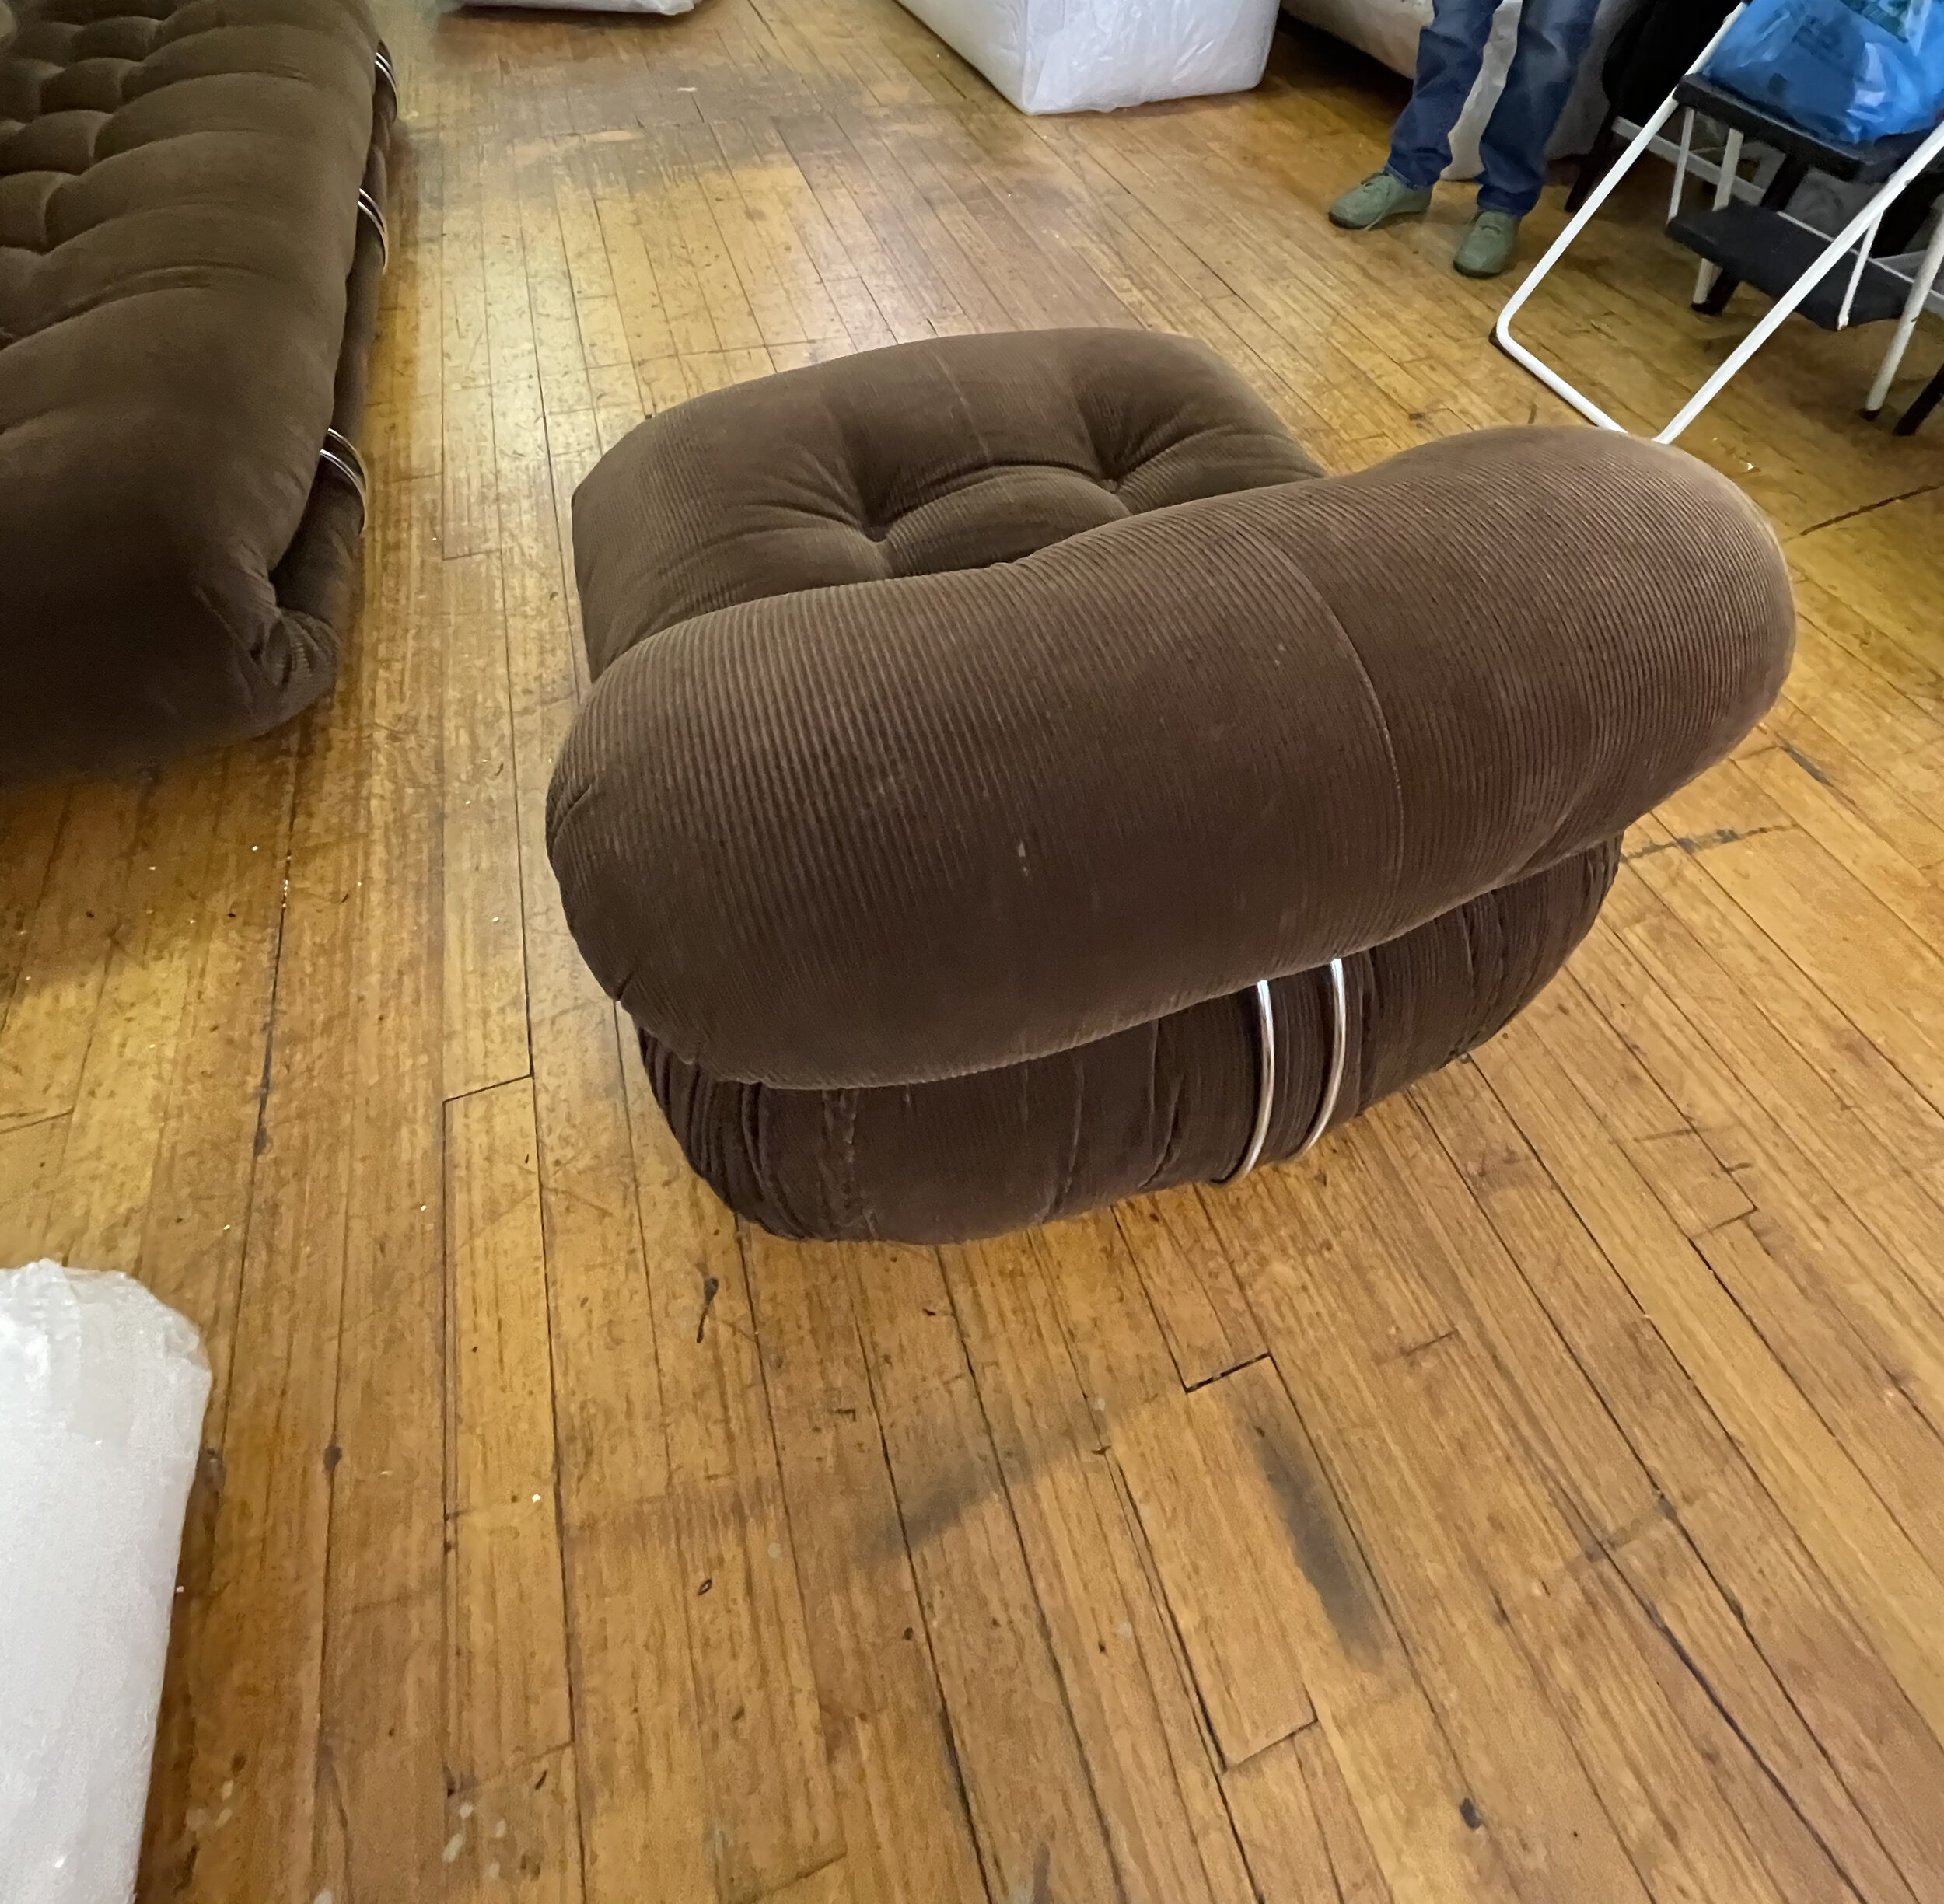 Vintage Soriana Sofa Large Dark Brown Fabric by Tobia Scarpa | image of lounge chair